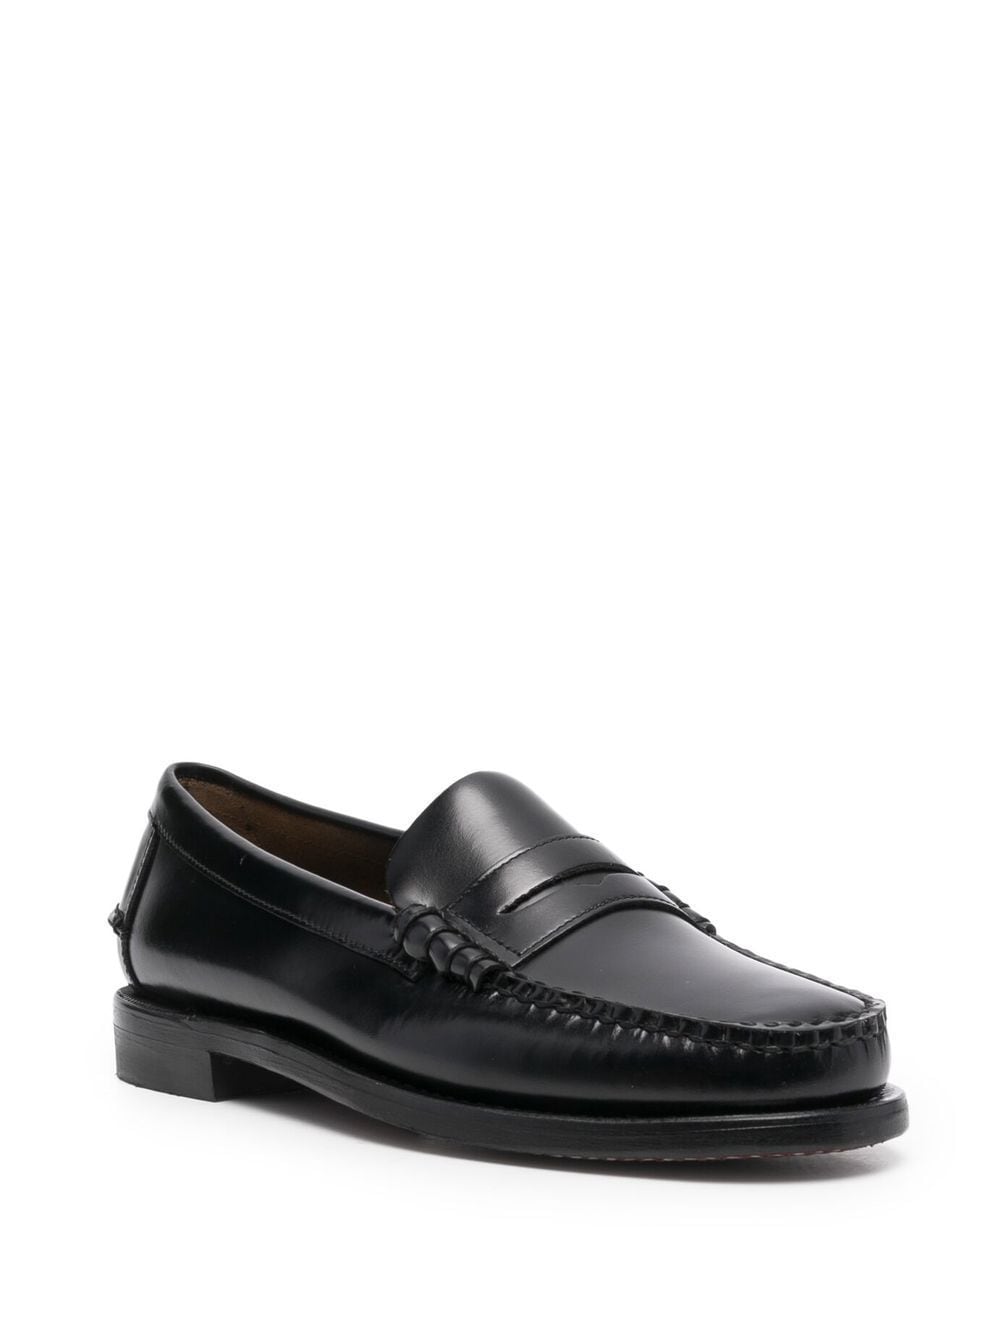 Black leather classic loafers